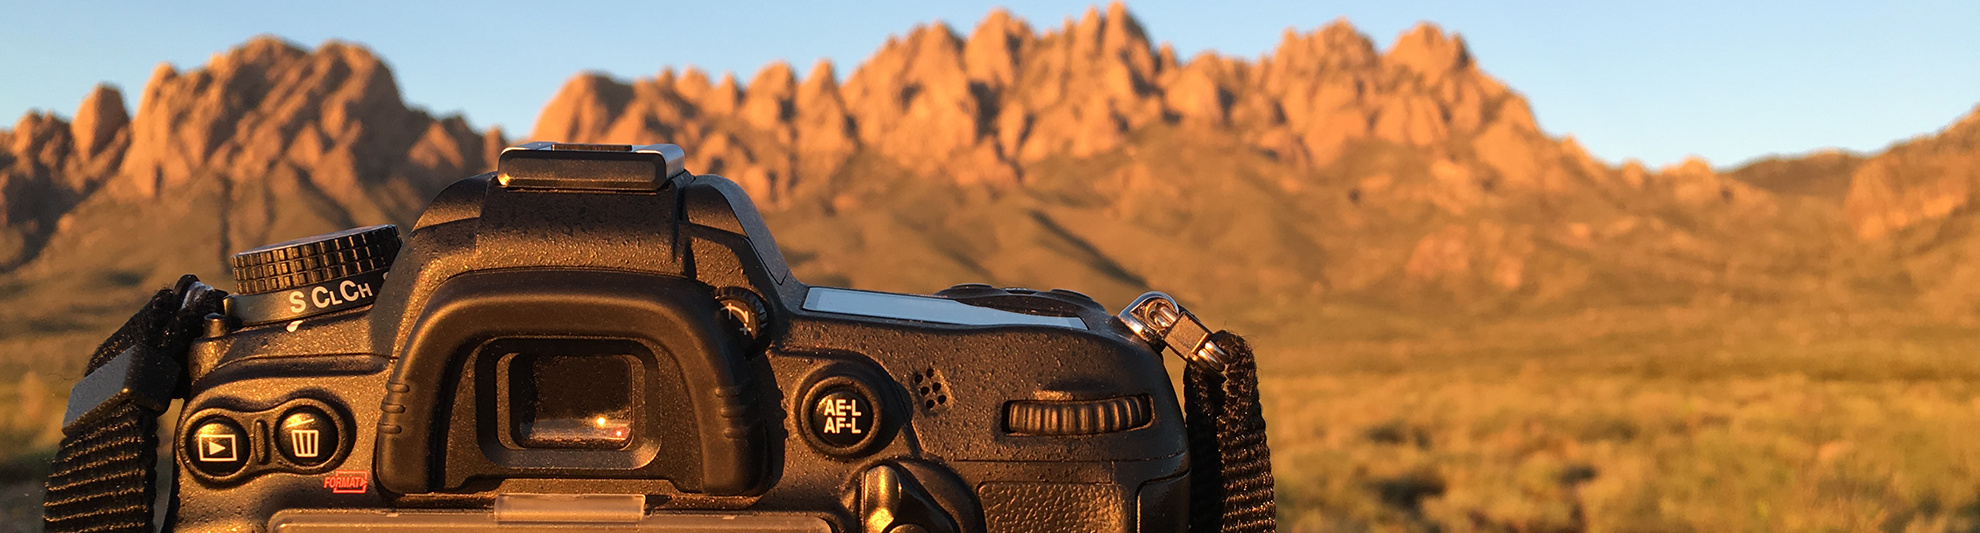 image of camera and organ mountains las cruces, nm